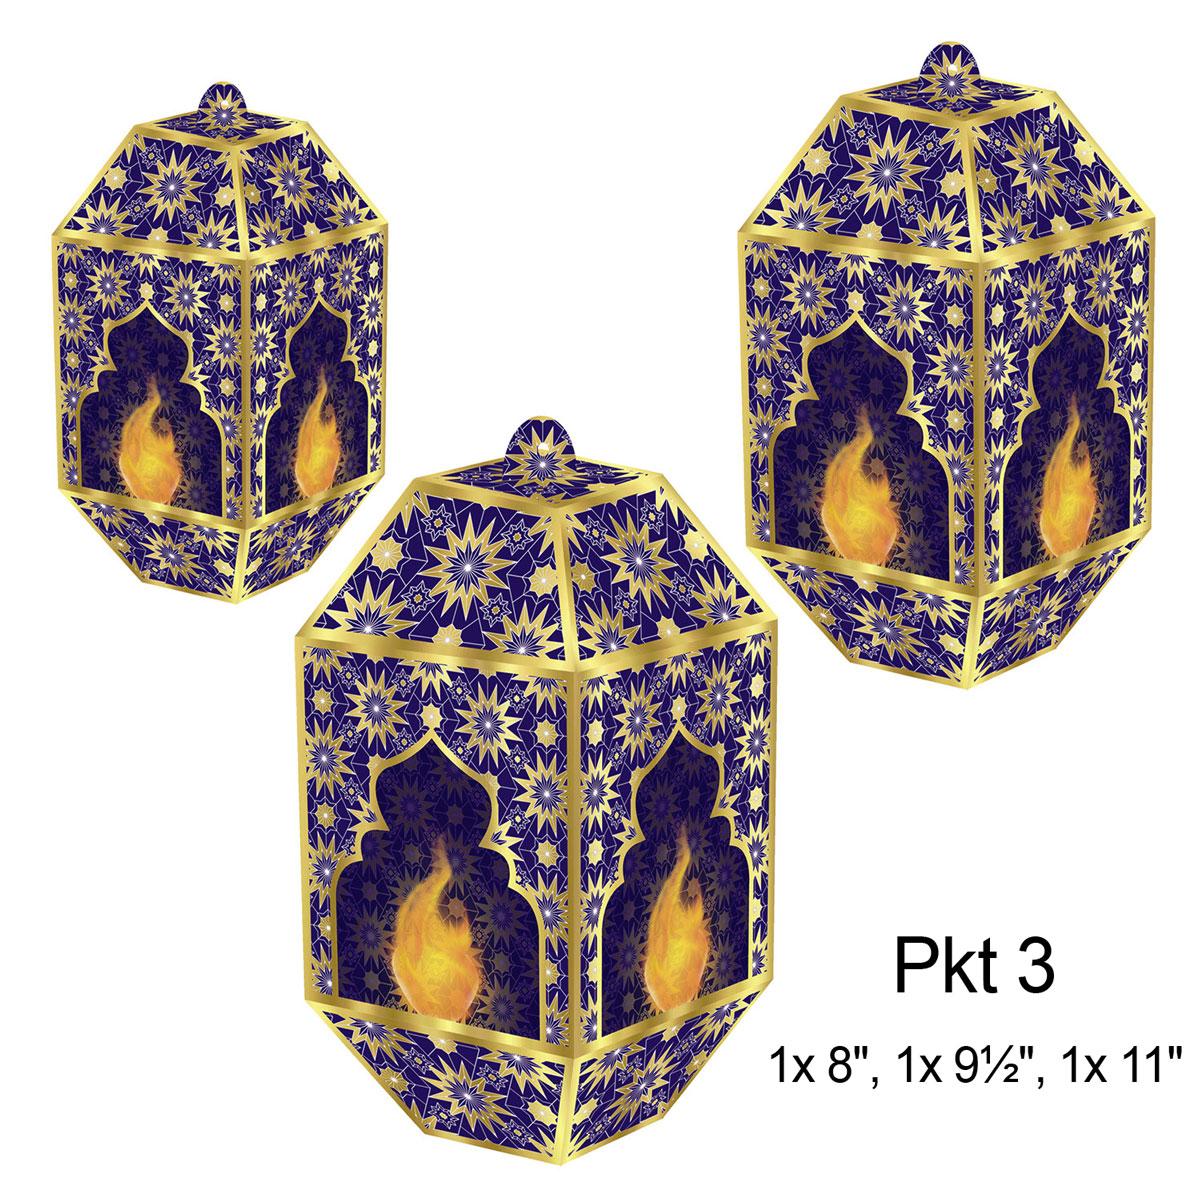 Foil Ramadan Paper Lanterns 3 Asstd Sizes by Beistle 53726 available in the UK here at Karnival Costumes online party shop